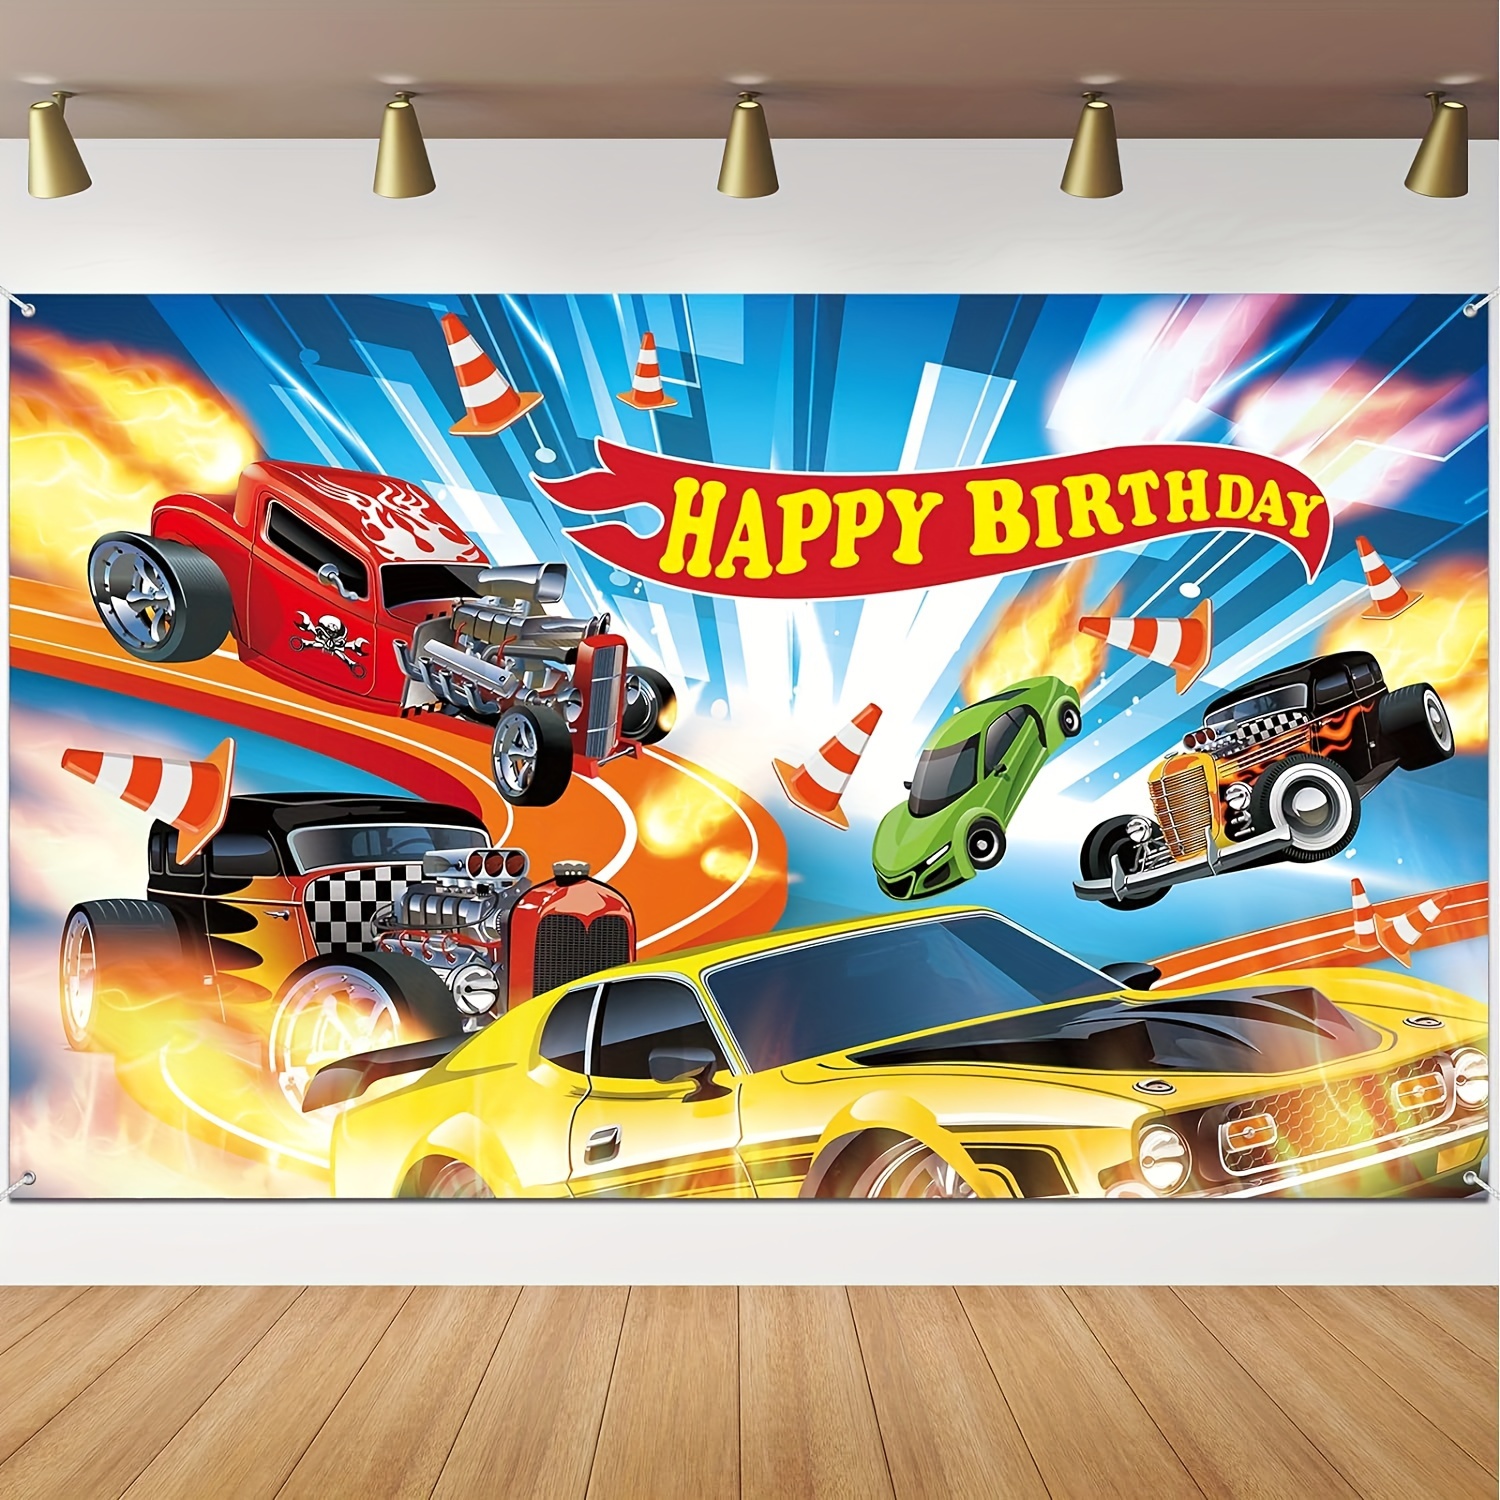 

1pc, Hot Car Birthday Party Decorations Hot Race Car Birthday Party Backdrop Banner Background For Boys Birthday Supplies Racing Car Signs For Indoor Outdoor Birthday Party Decorations Supplies